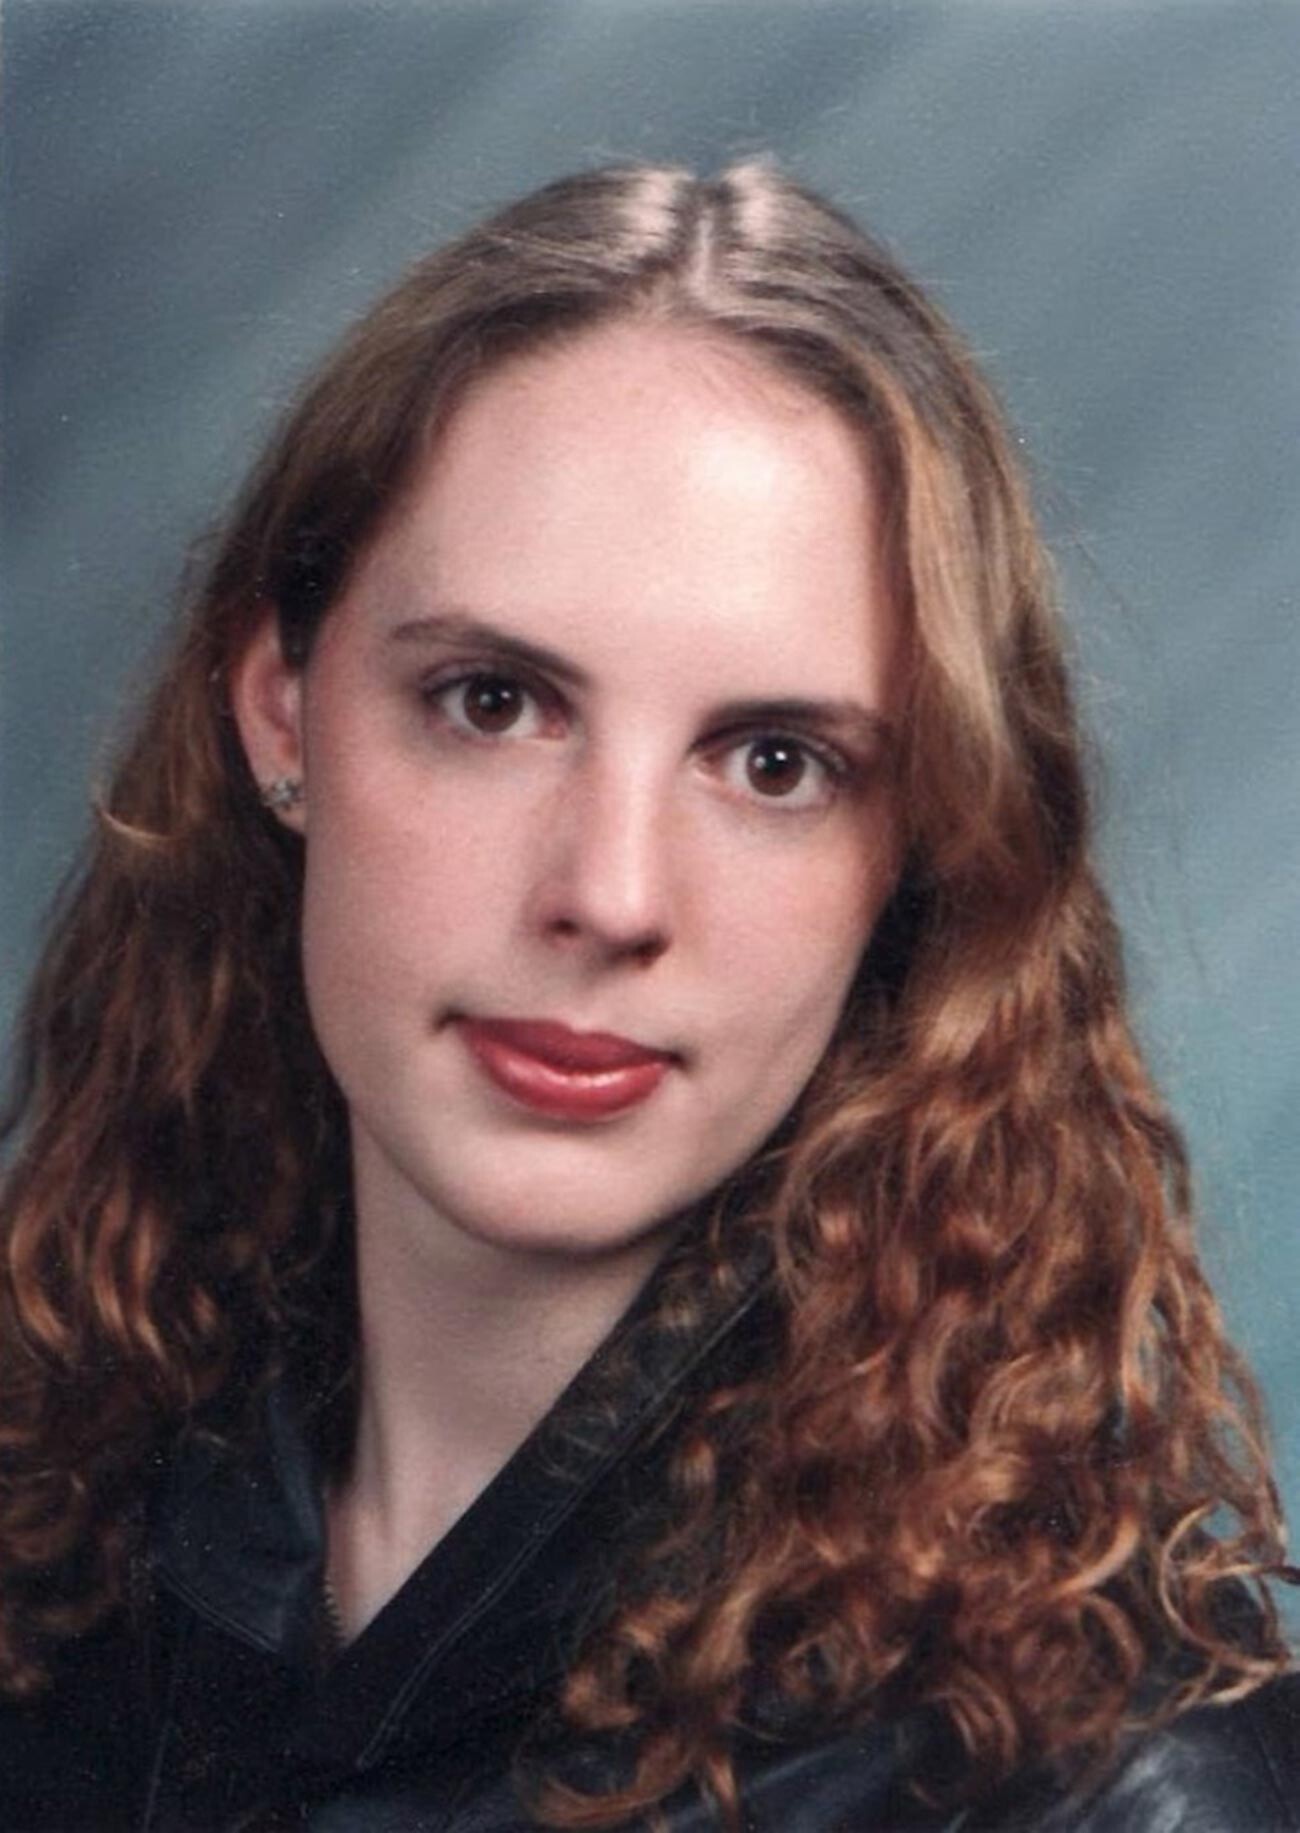 Laura in her younger years